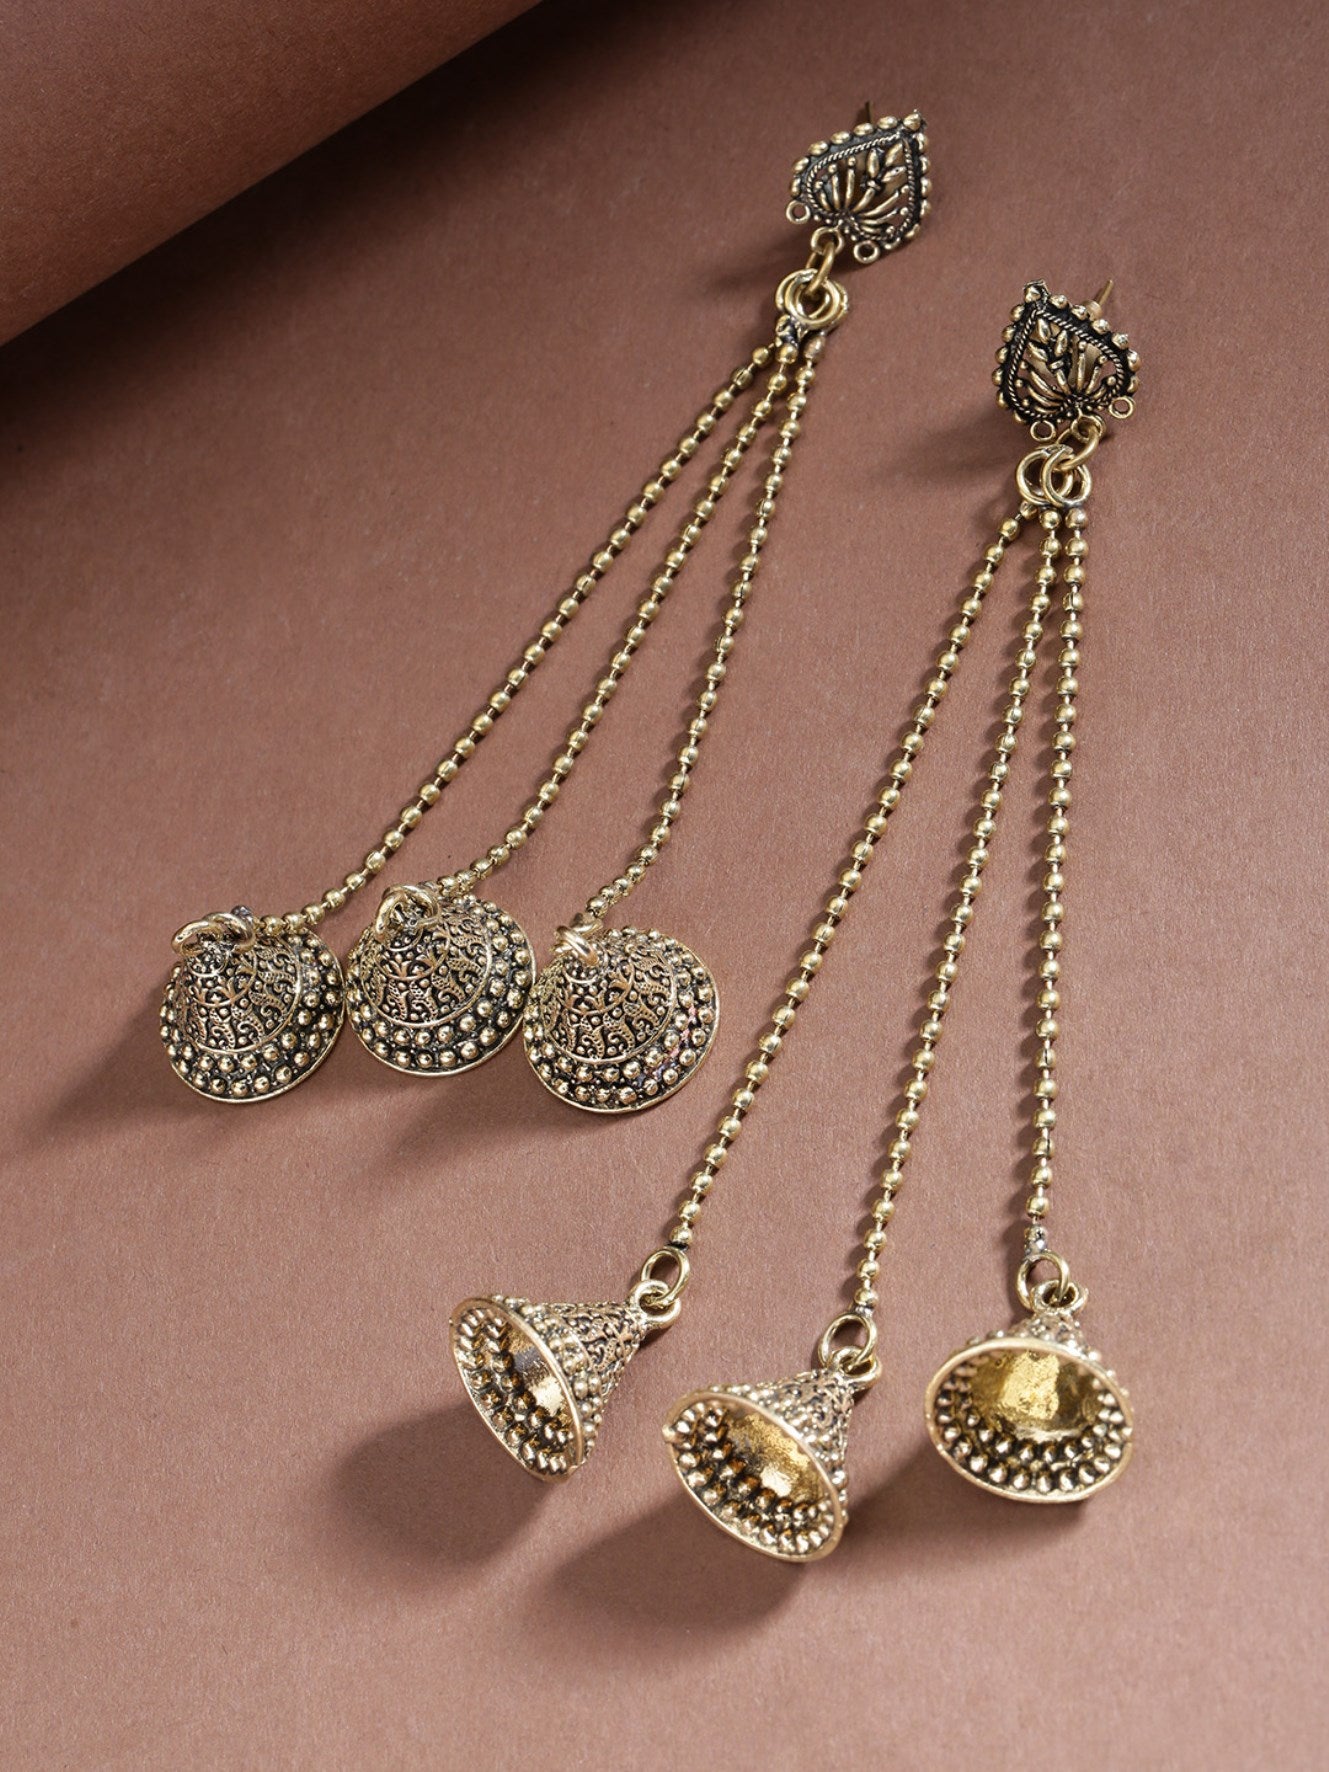 Discover 109+ long chain earrings for girls latest